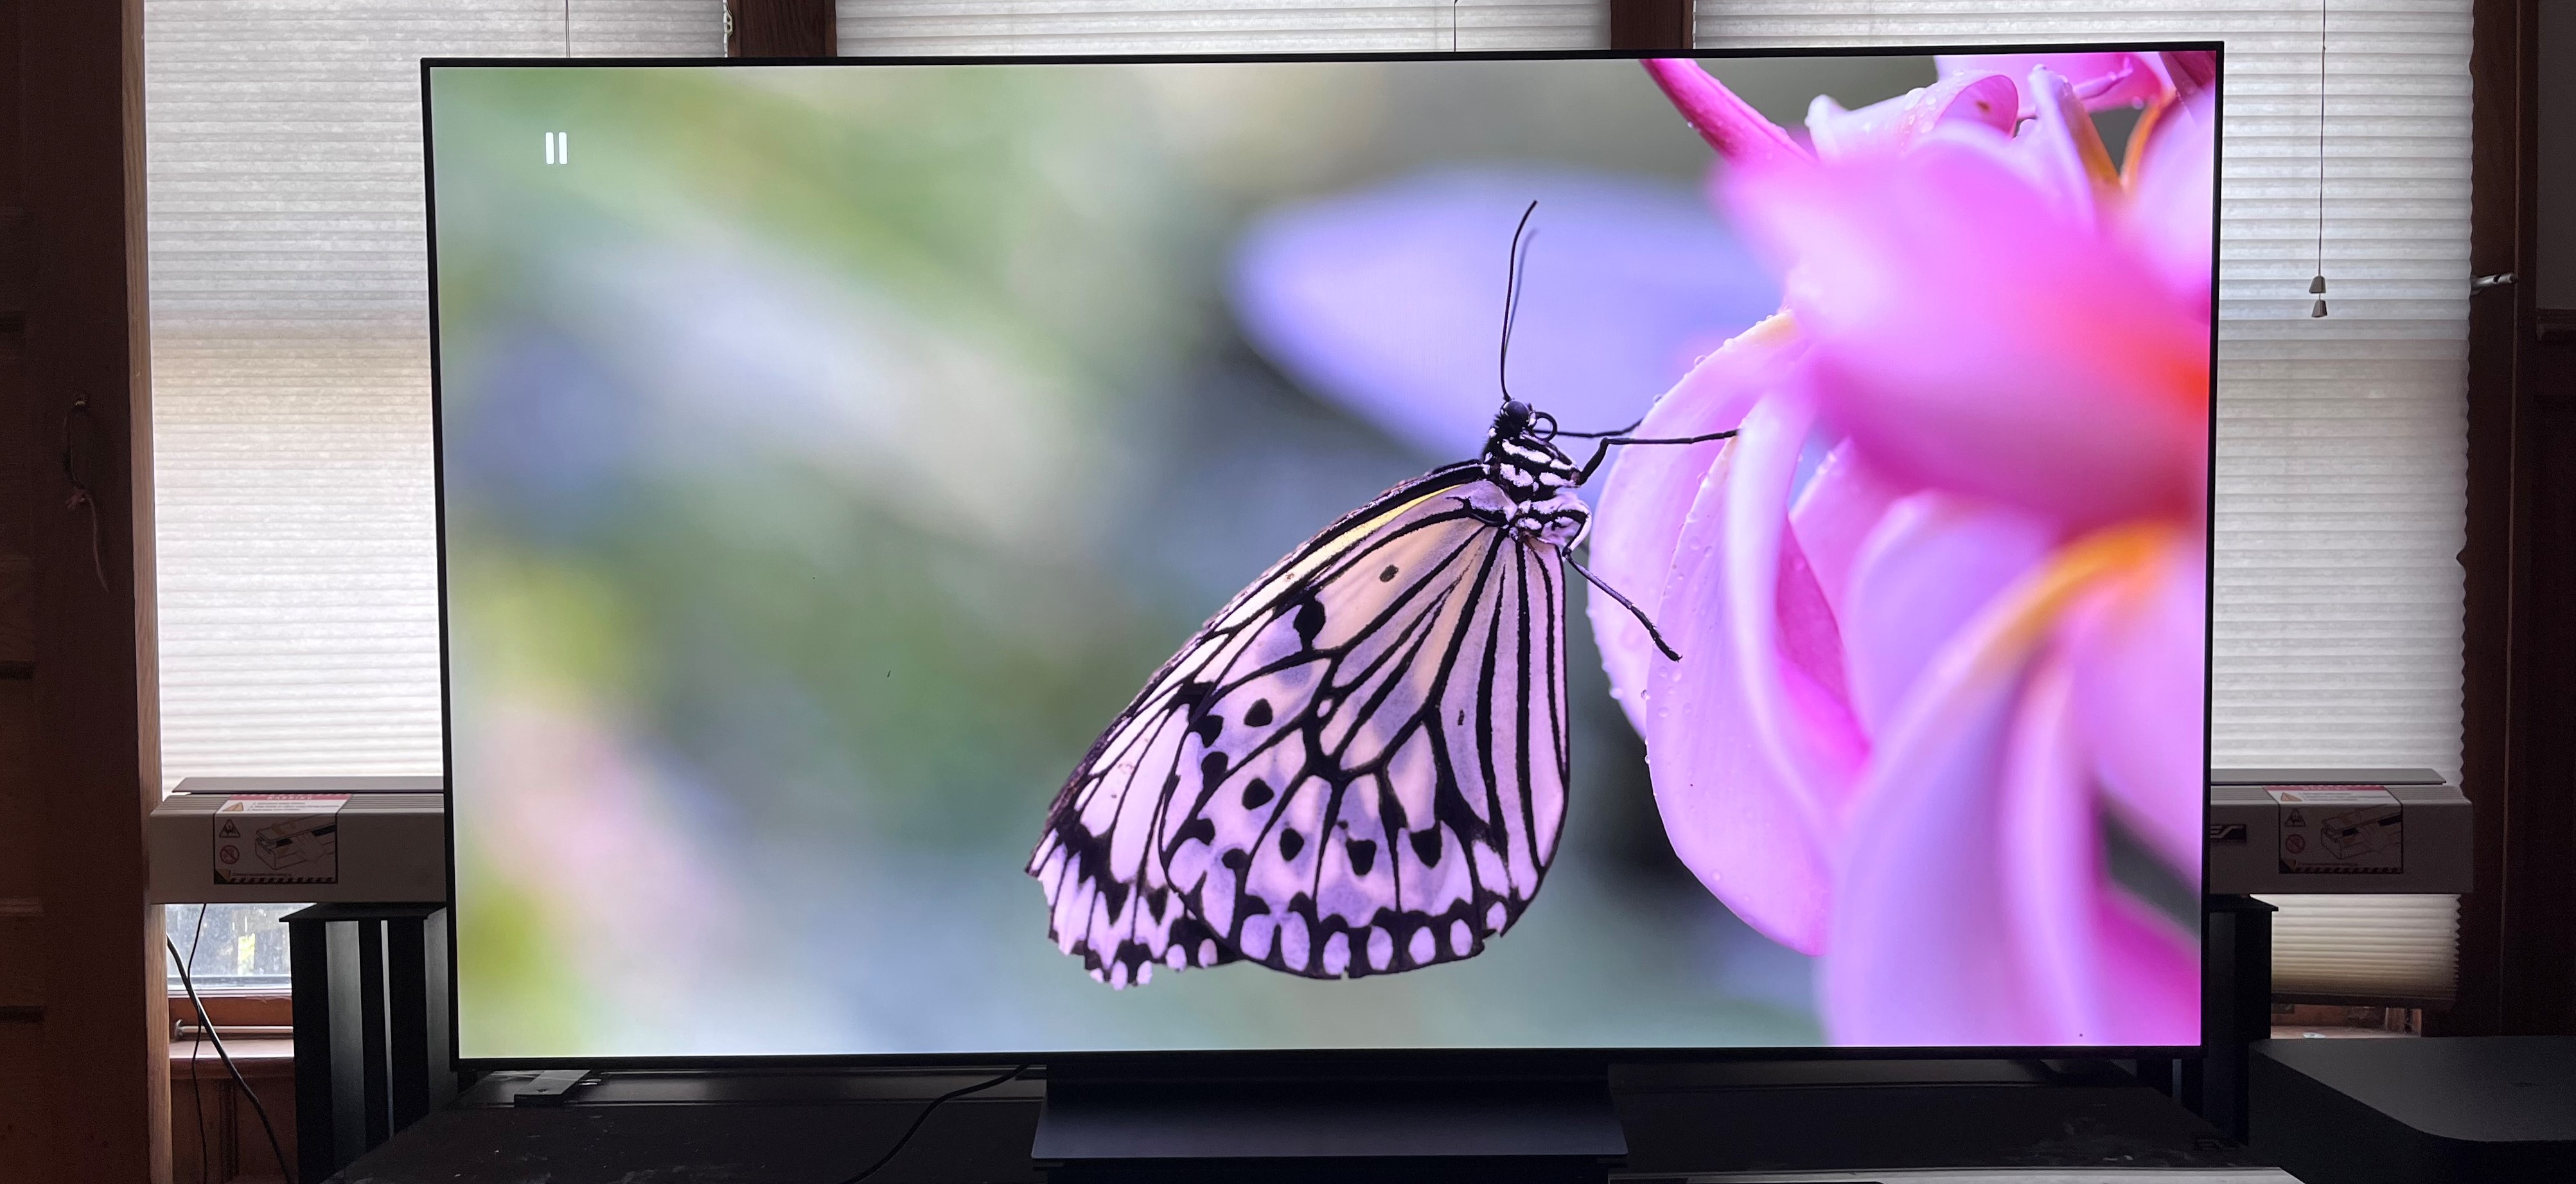 LG TVs Getting Two Major New Gaming Features